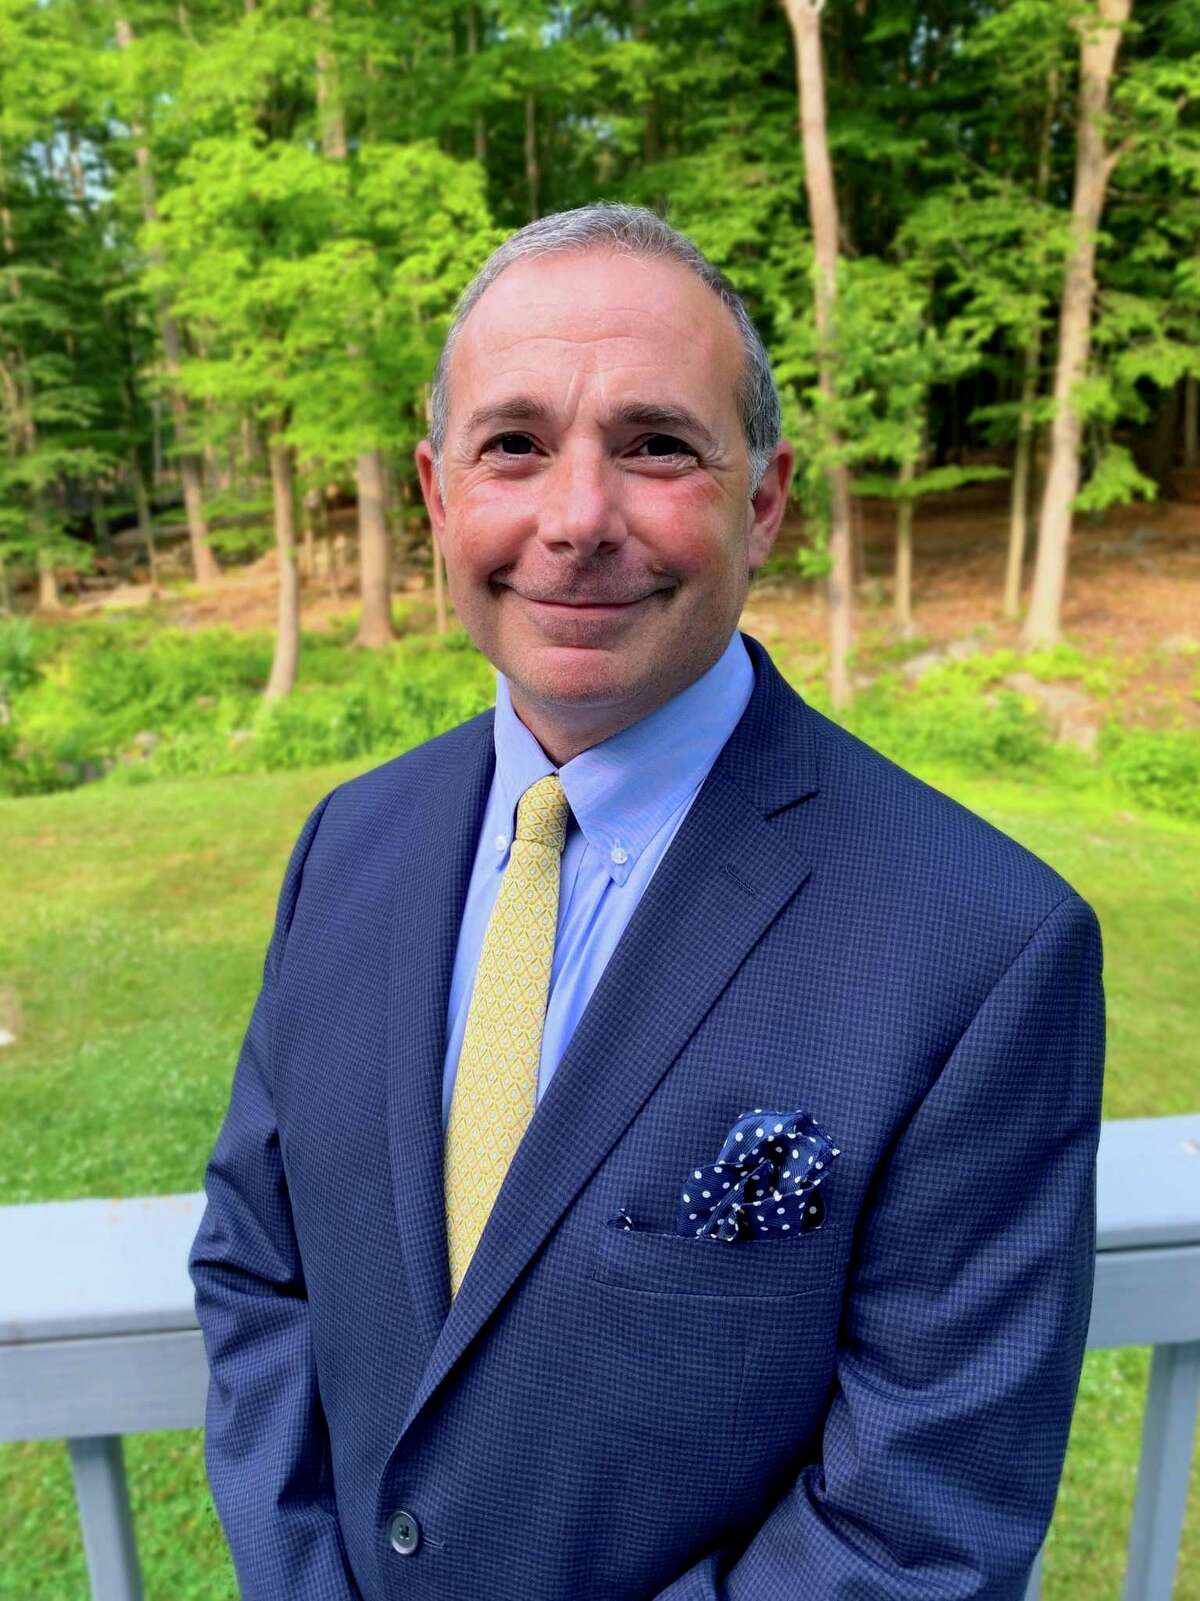 Marc D’Amico, the longtime principial at Glenville School, has been appointed director of curriculum for kindergarten through eighth grade and head of K-5 leadership for the Greenwich Public Schools.